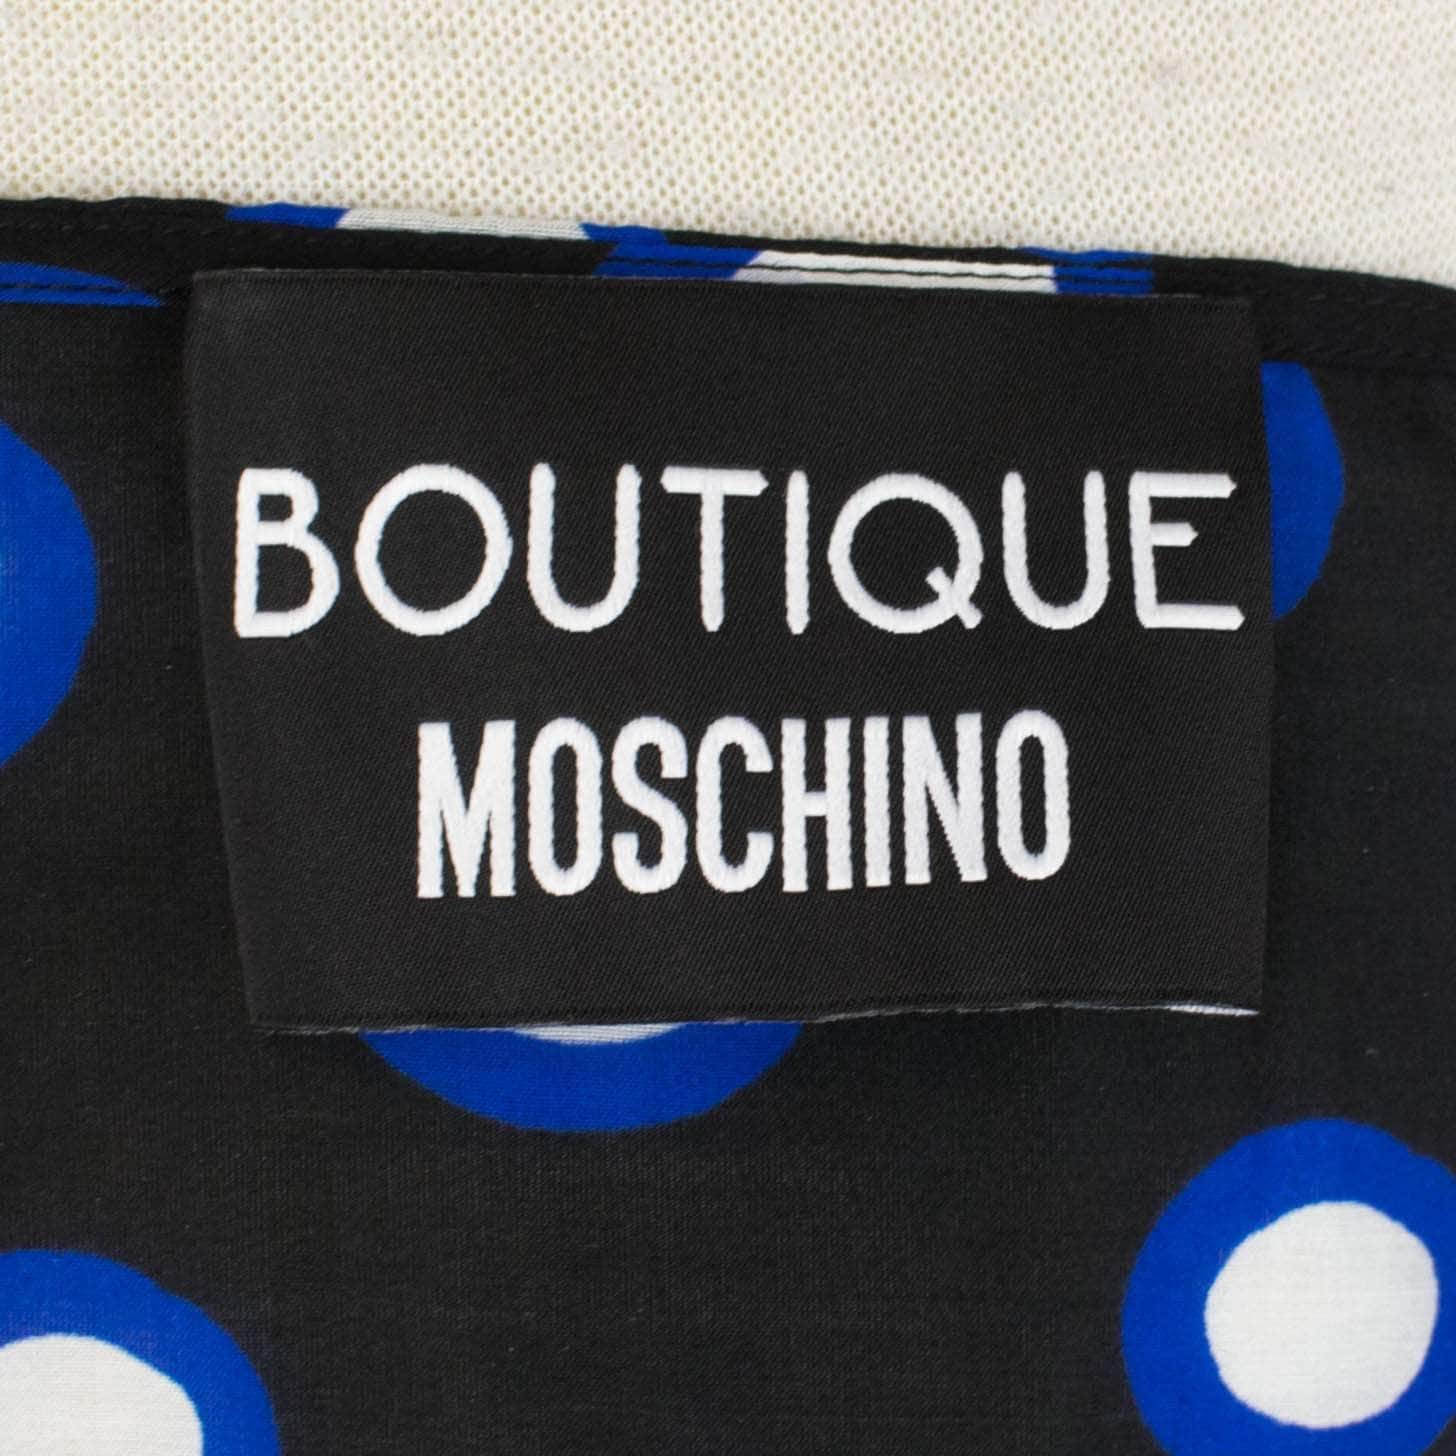 MOSCHINO BOUTIQUE chicmi, couponcollection, gender-womens, main-clothing, moschino-boutique, size-8-us-42-eu, under-250, womens-blouses 8 US / 42 EU MOSCHINO BOUTIQUE Women's Black 'Sleeveless Polka Dot' Blouse Top 54LE-1341/8 54LE-1341/8